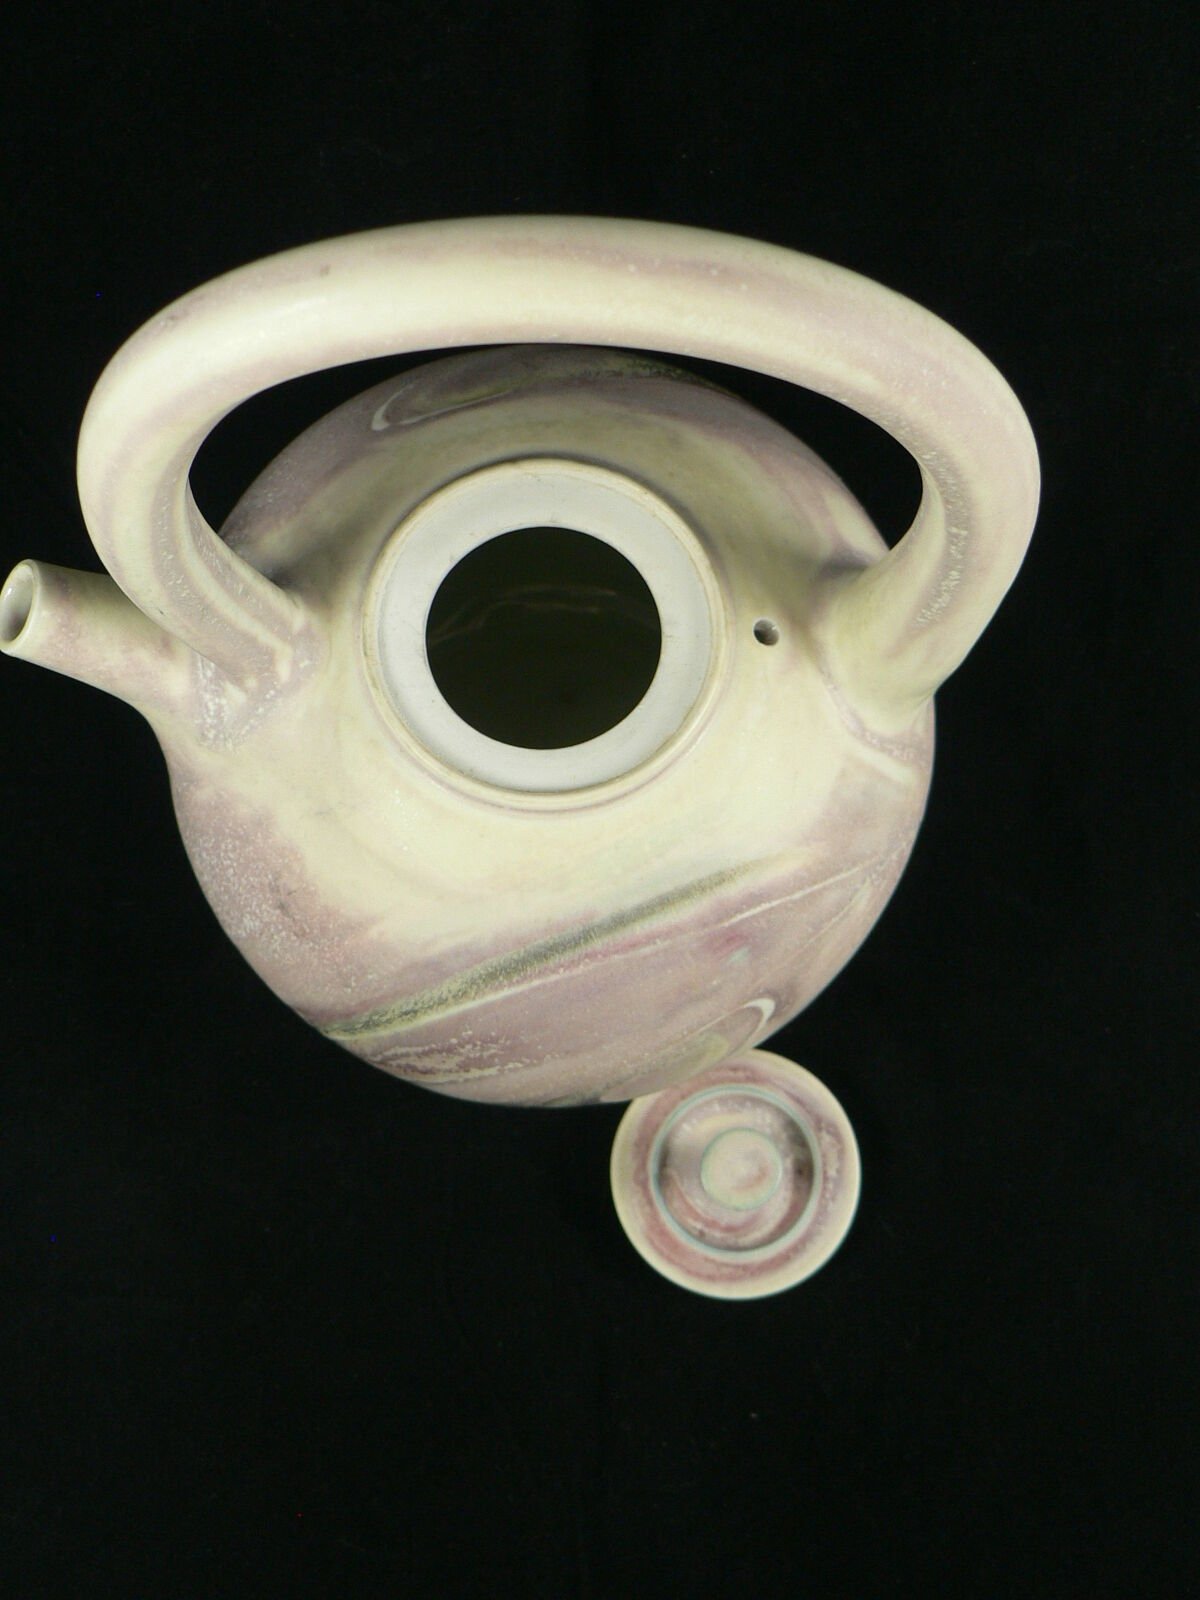 Ceramic Pottery Teapot Fixed Handle Signed by Artist Shannon